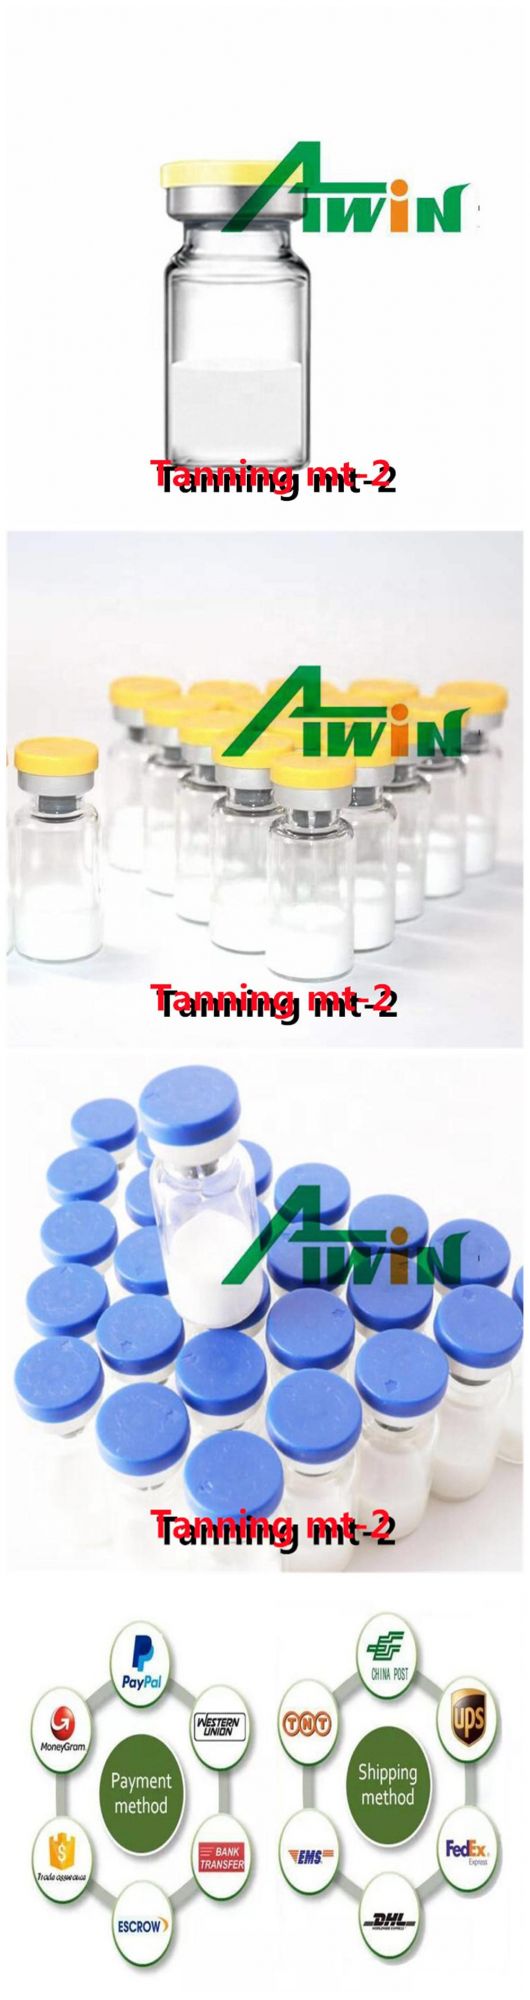 Peptides Steroid Hormone Raw Powder with Top Purity